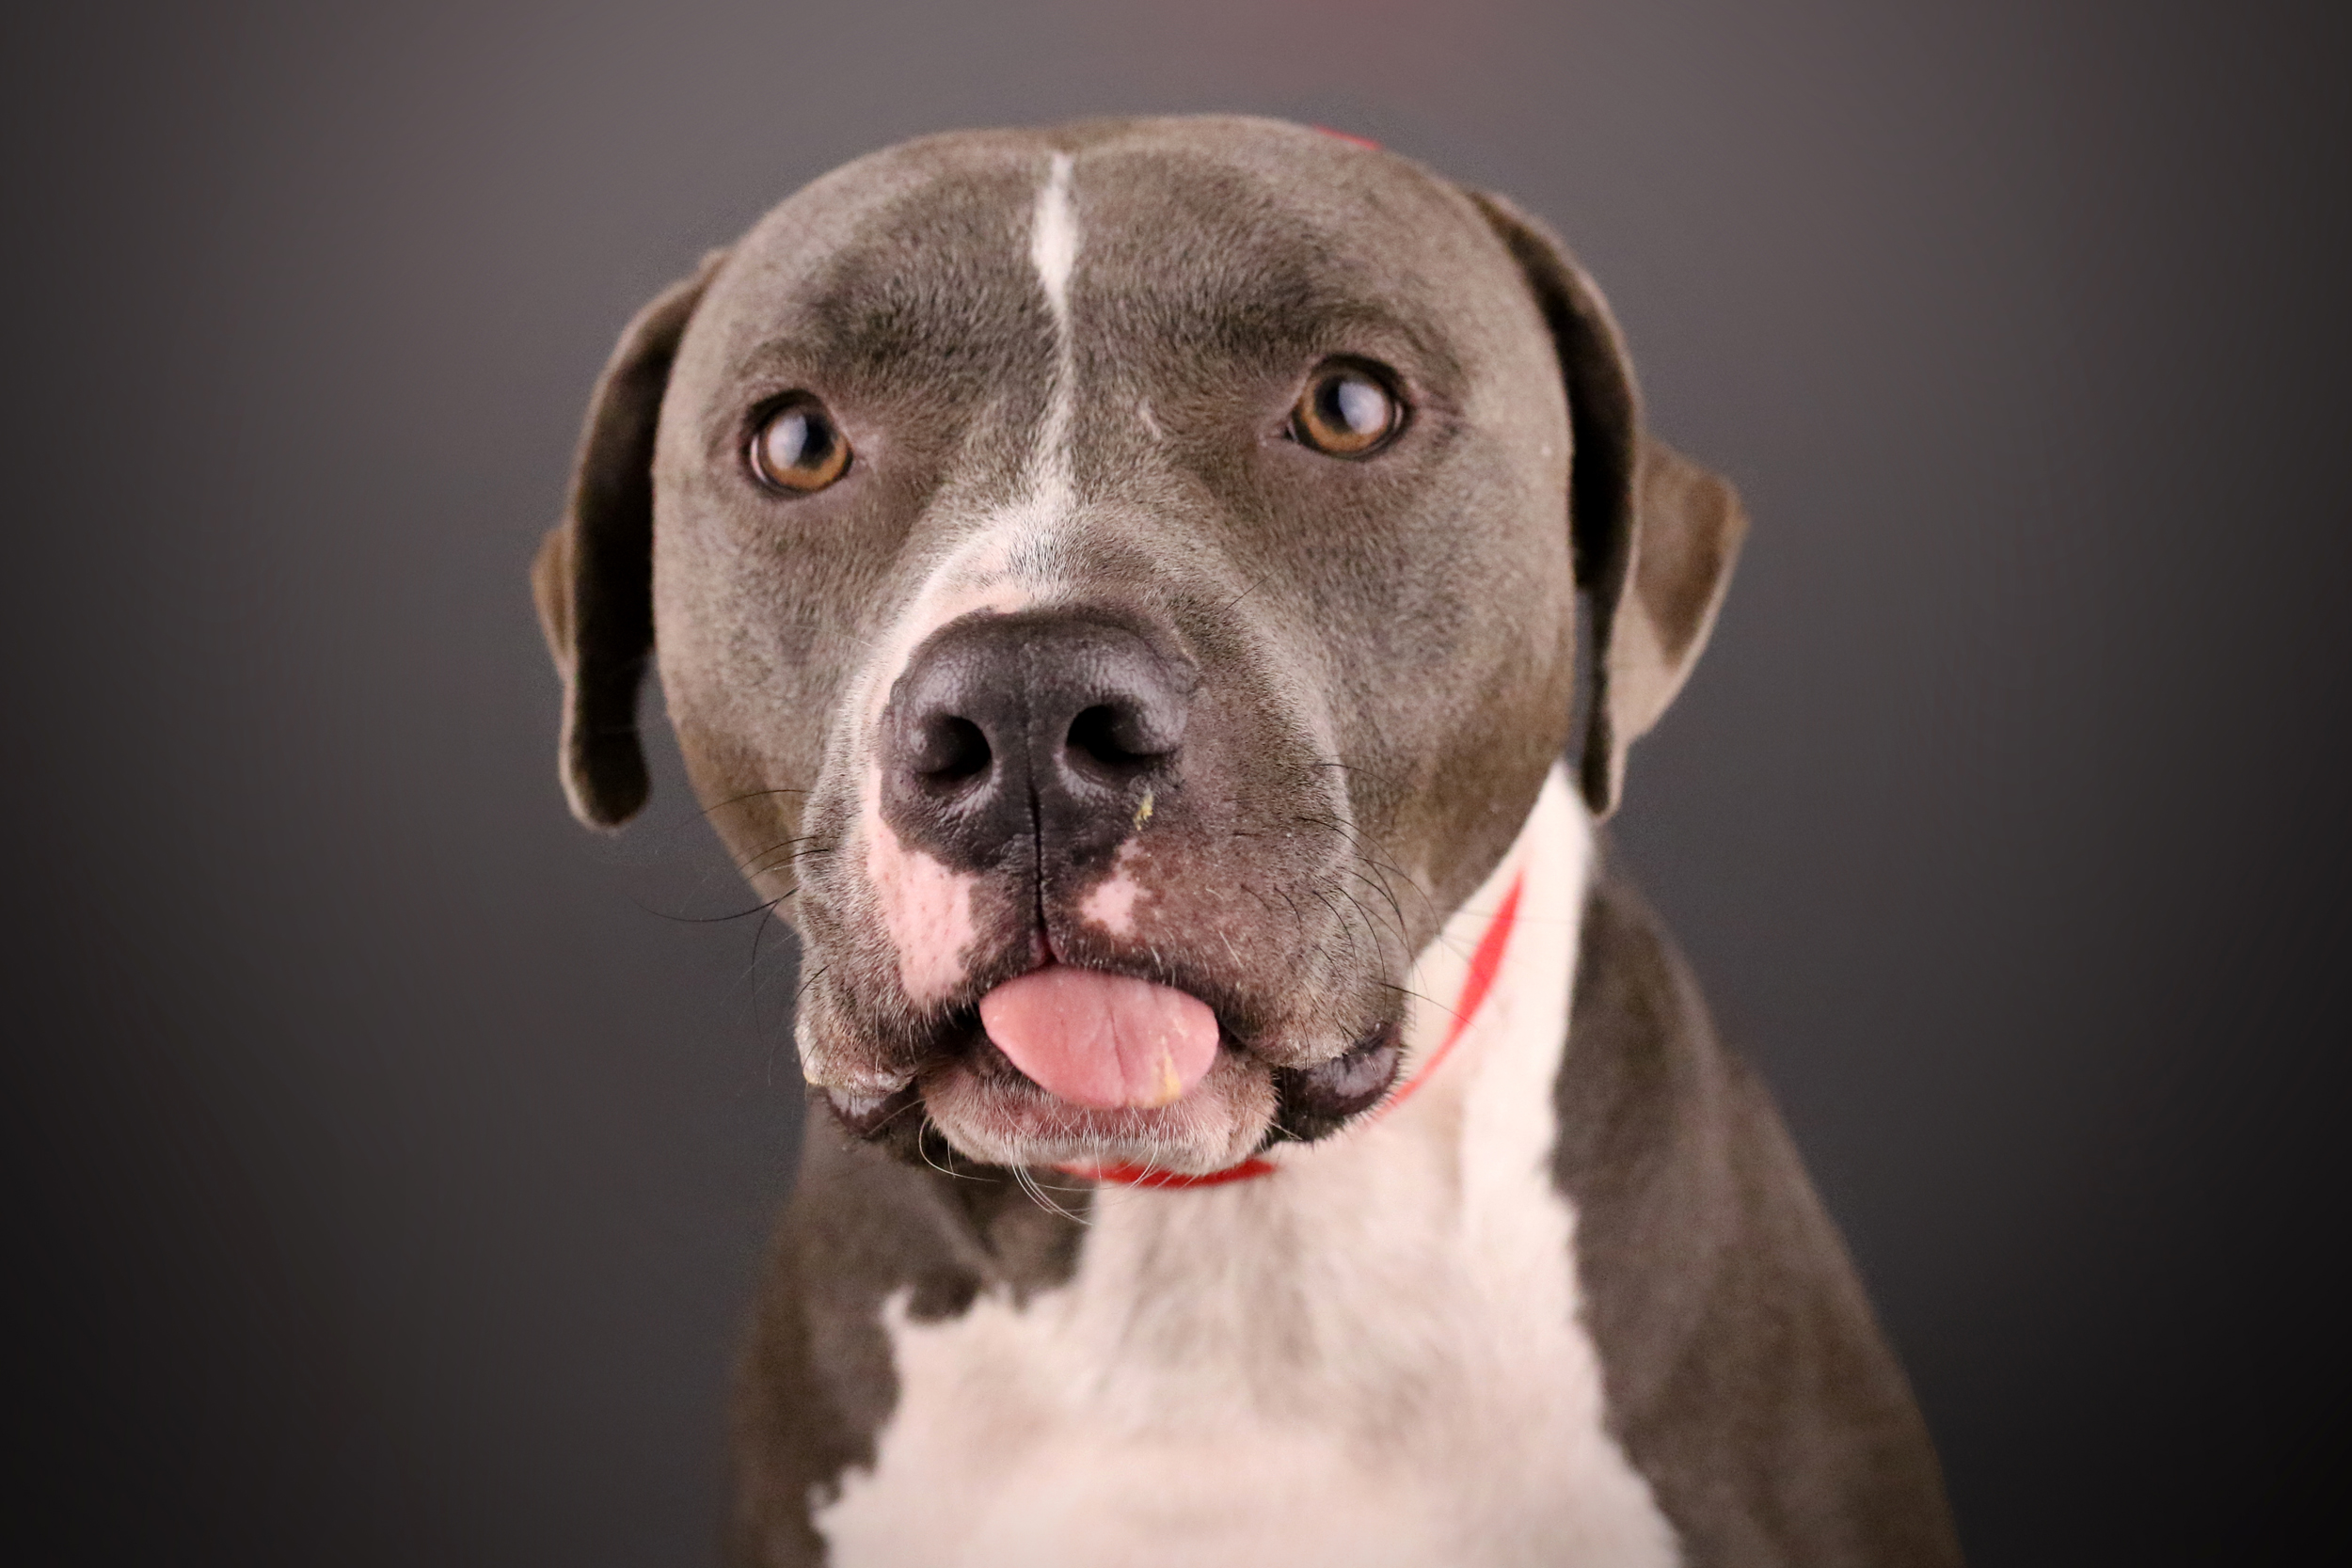 PHOTO: A dog sticks its tongue out while posing.